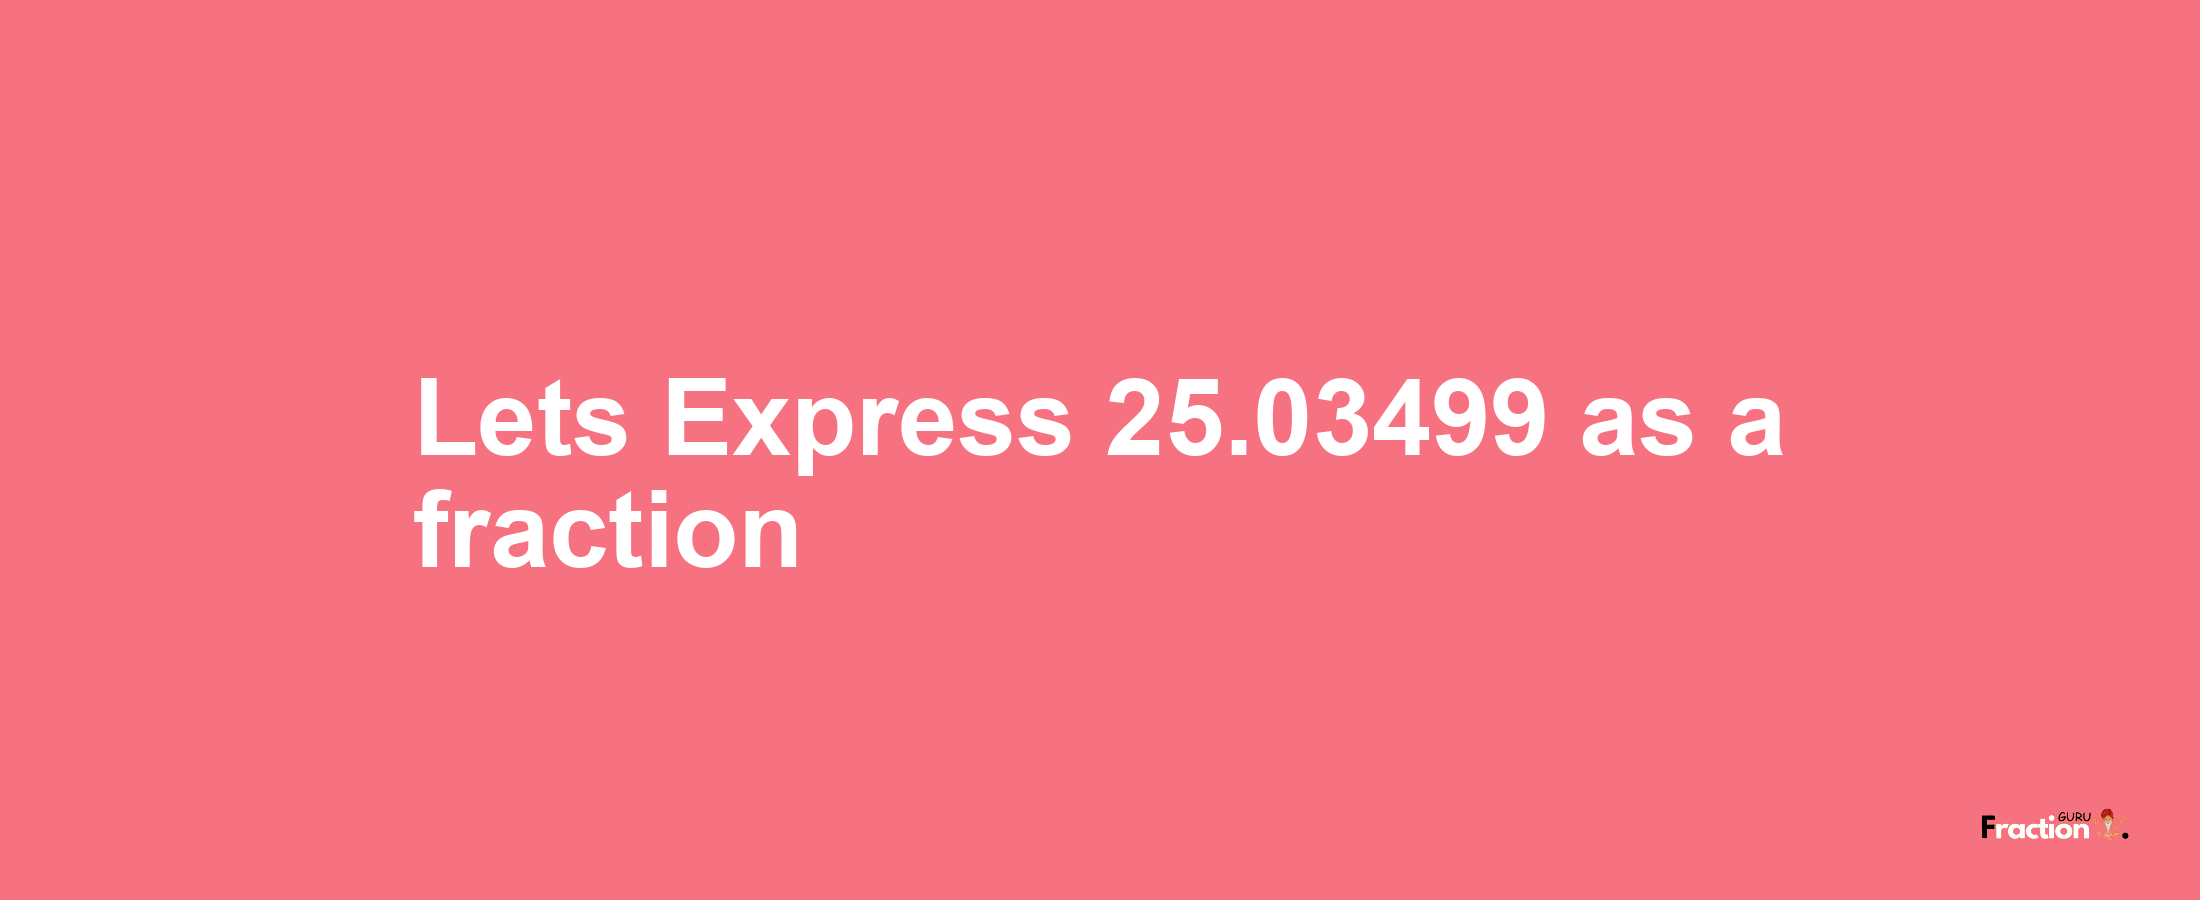 Lets Express 25.03499 as afraction